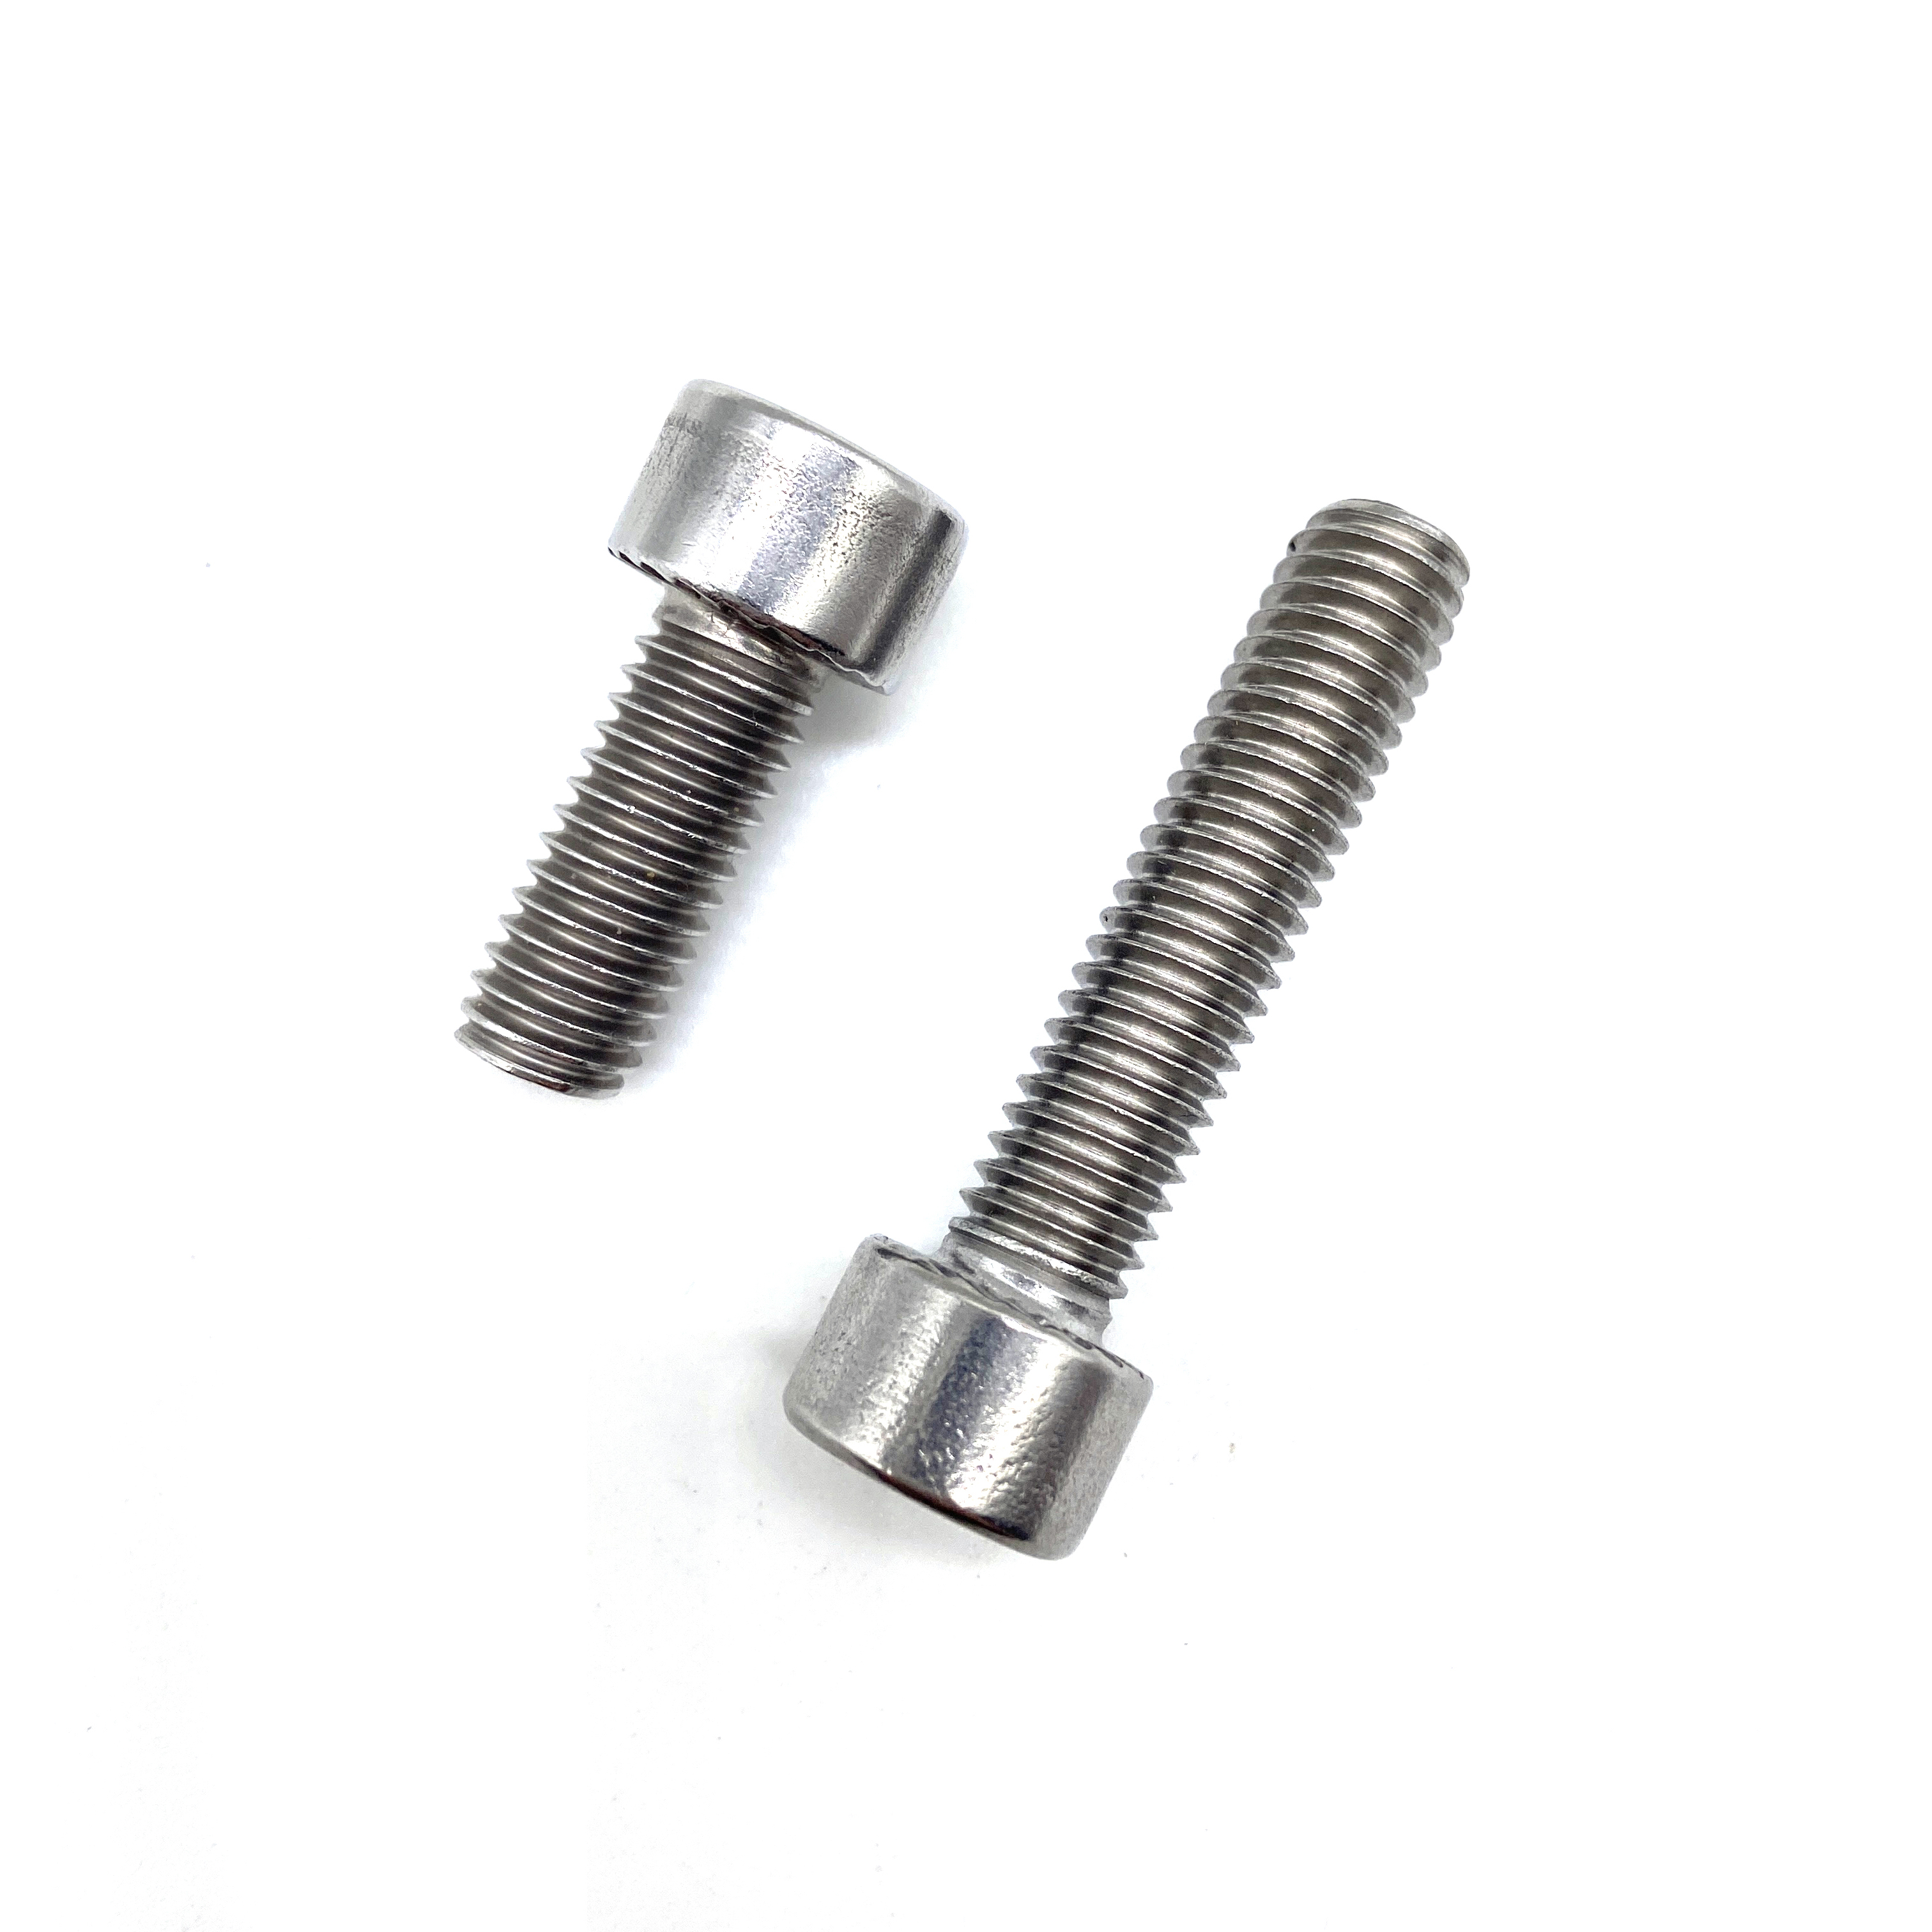 Cylinder Head Bolt A2 Stainless Steel M2 Cylinder Screw Hex 5x16 DIN912 